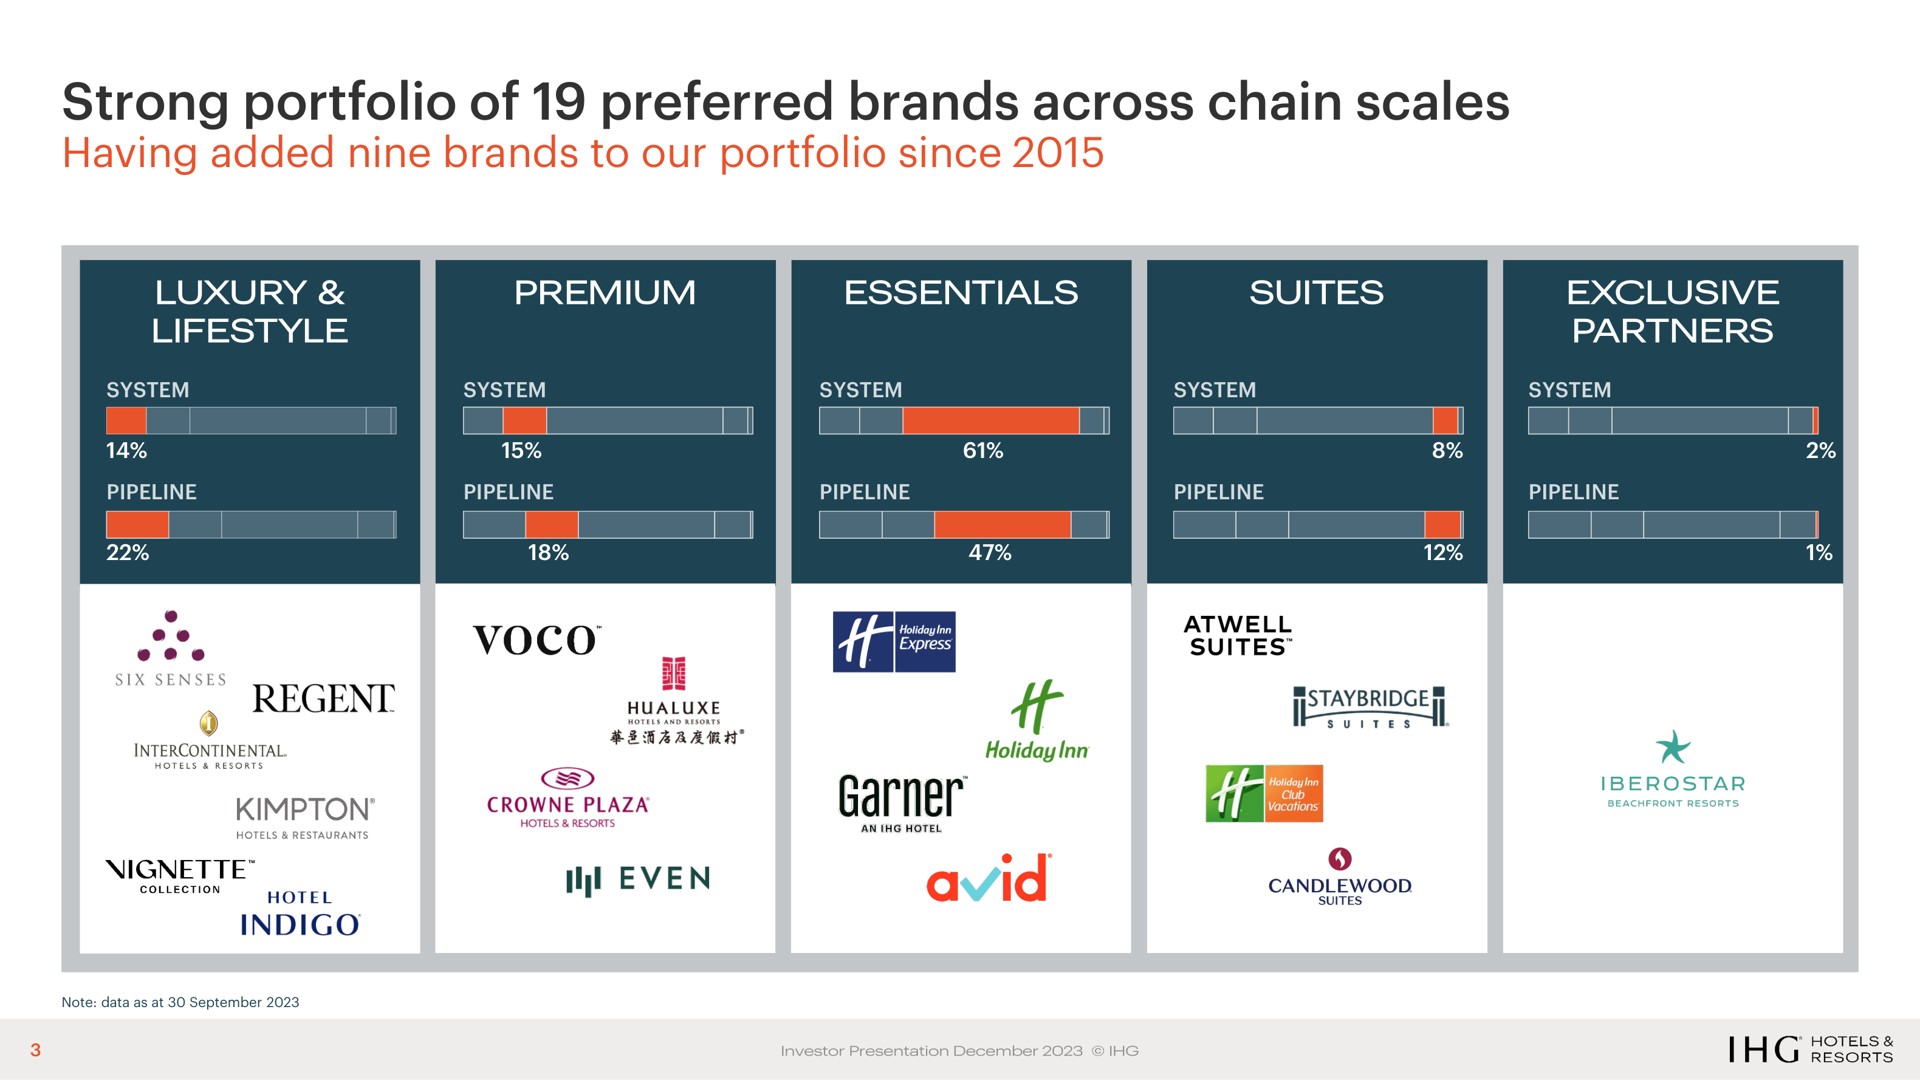 strong portfolio of preferred brands across chain scales pus even avid | IHG Hotels